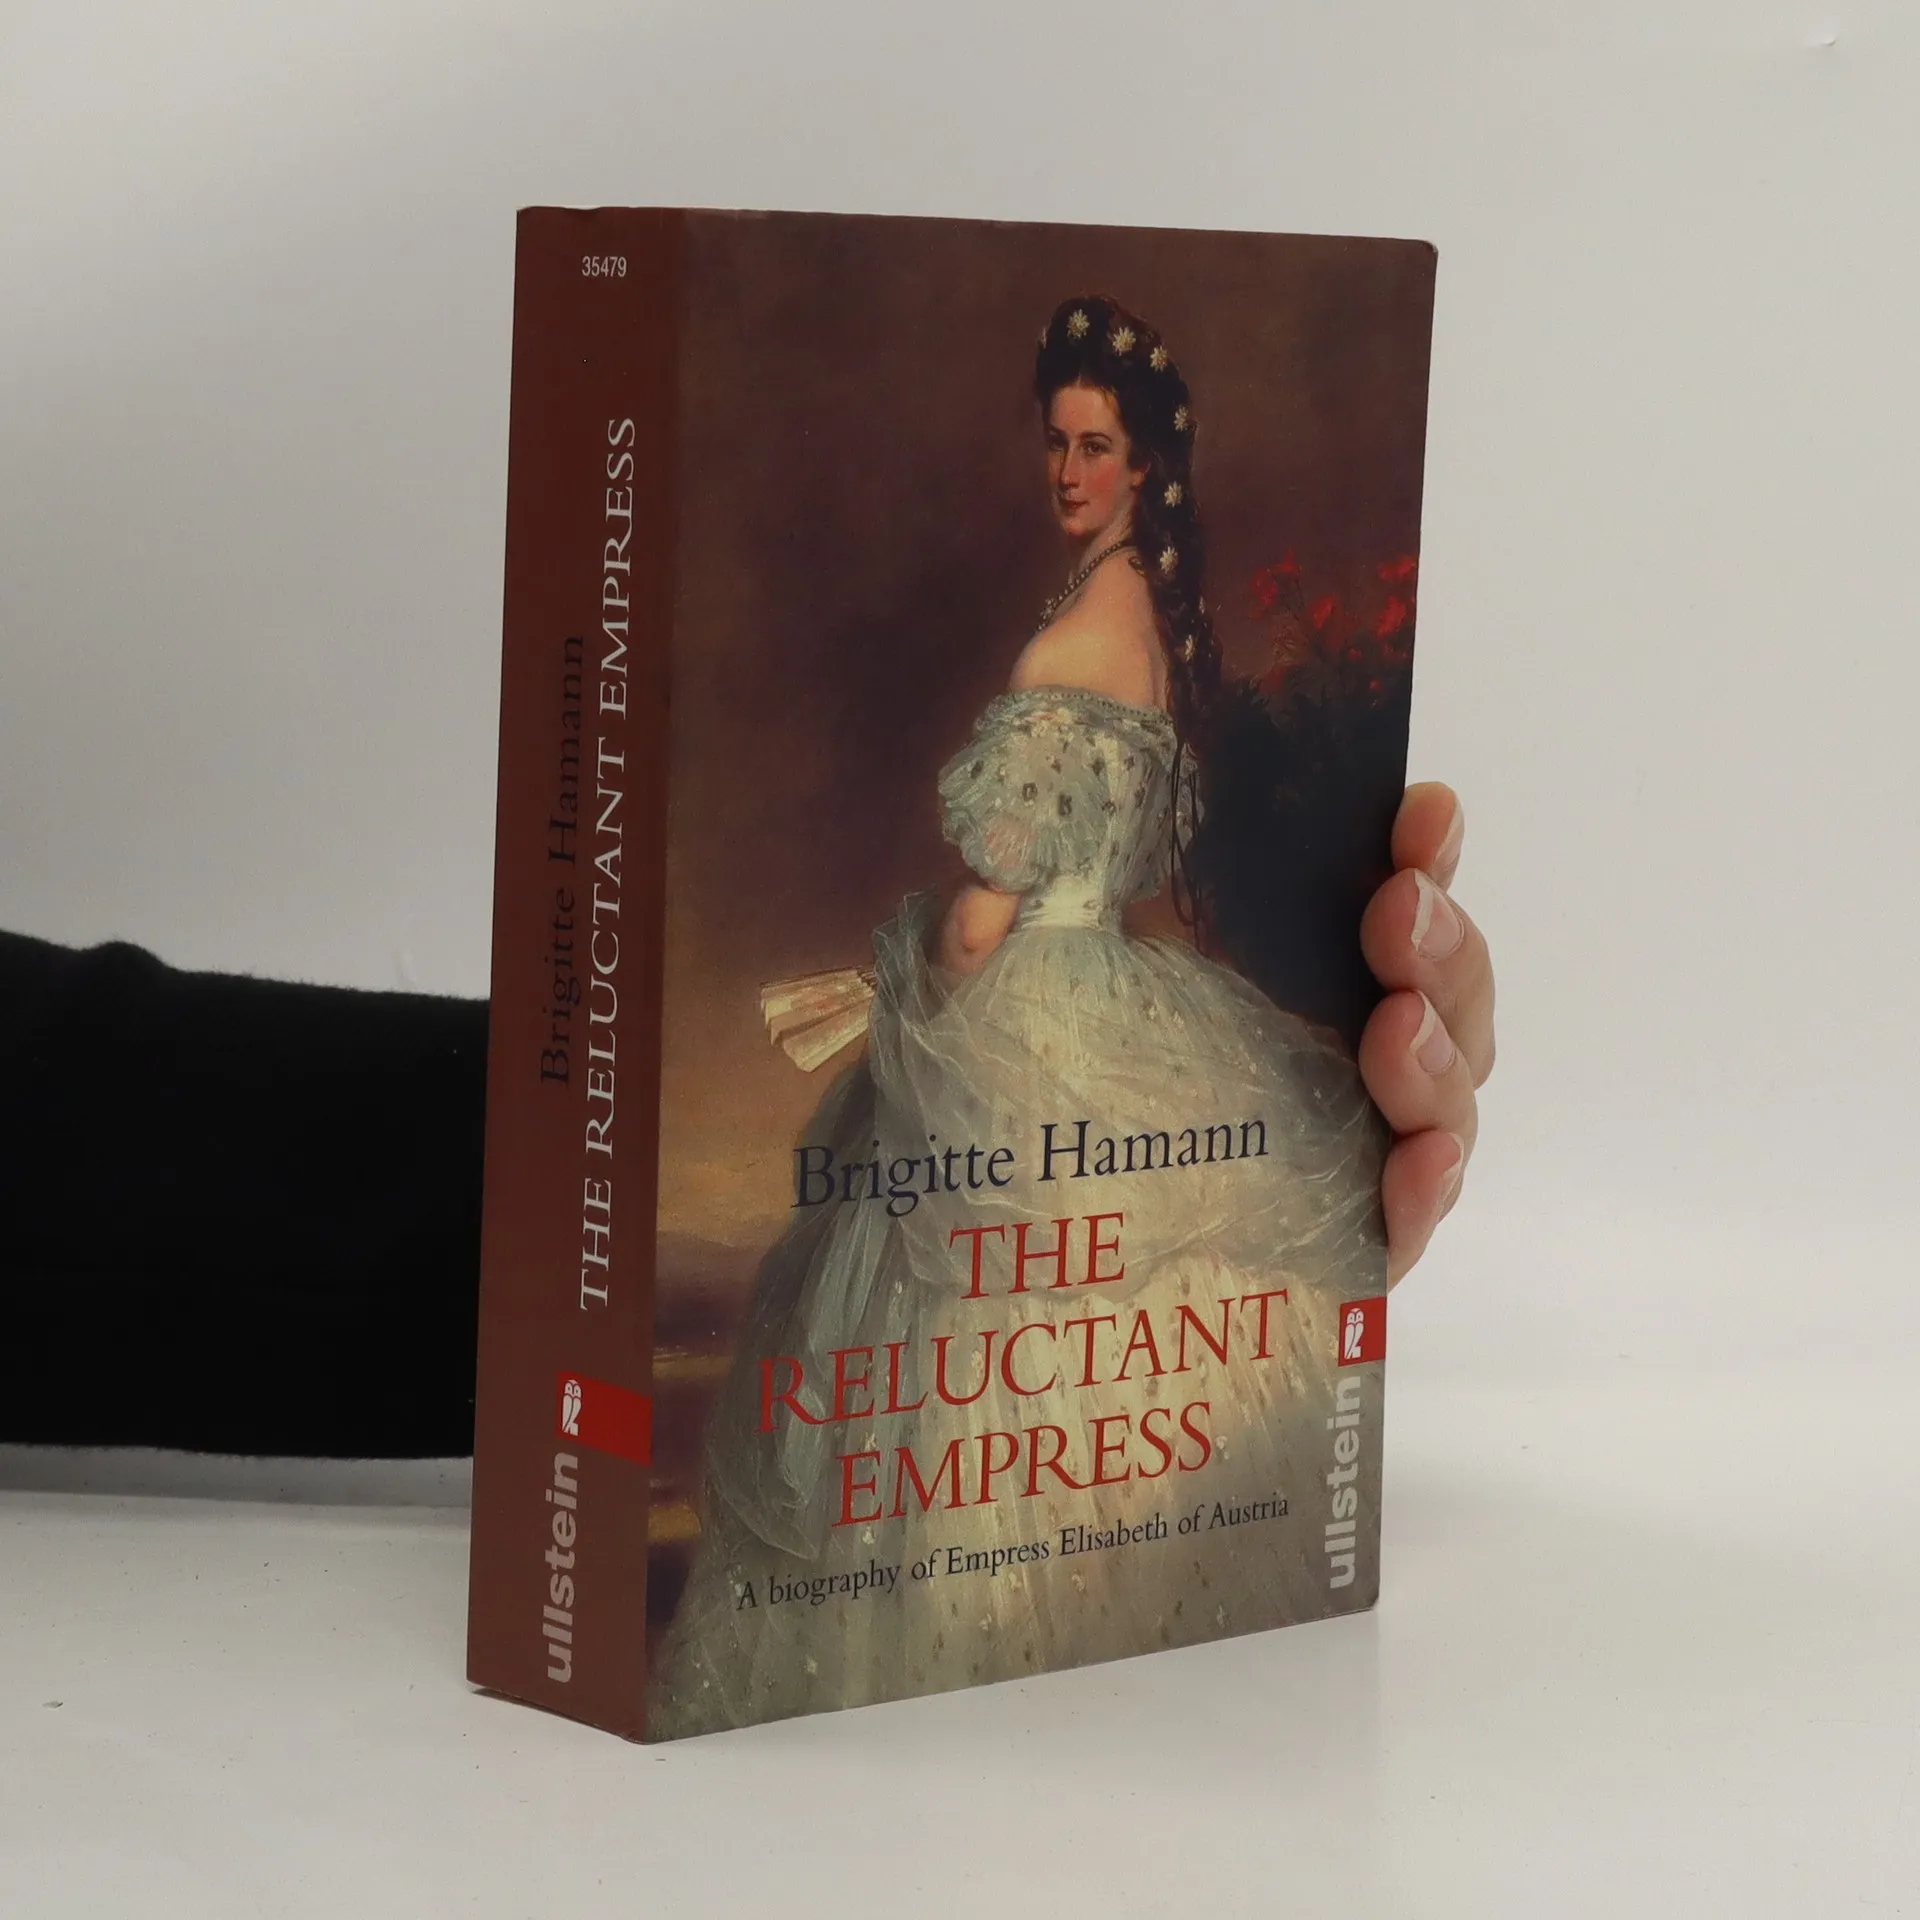 The reluctant empress - knihobot.cz